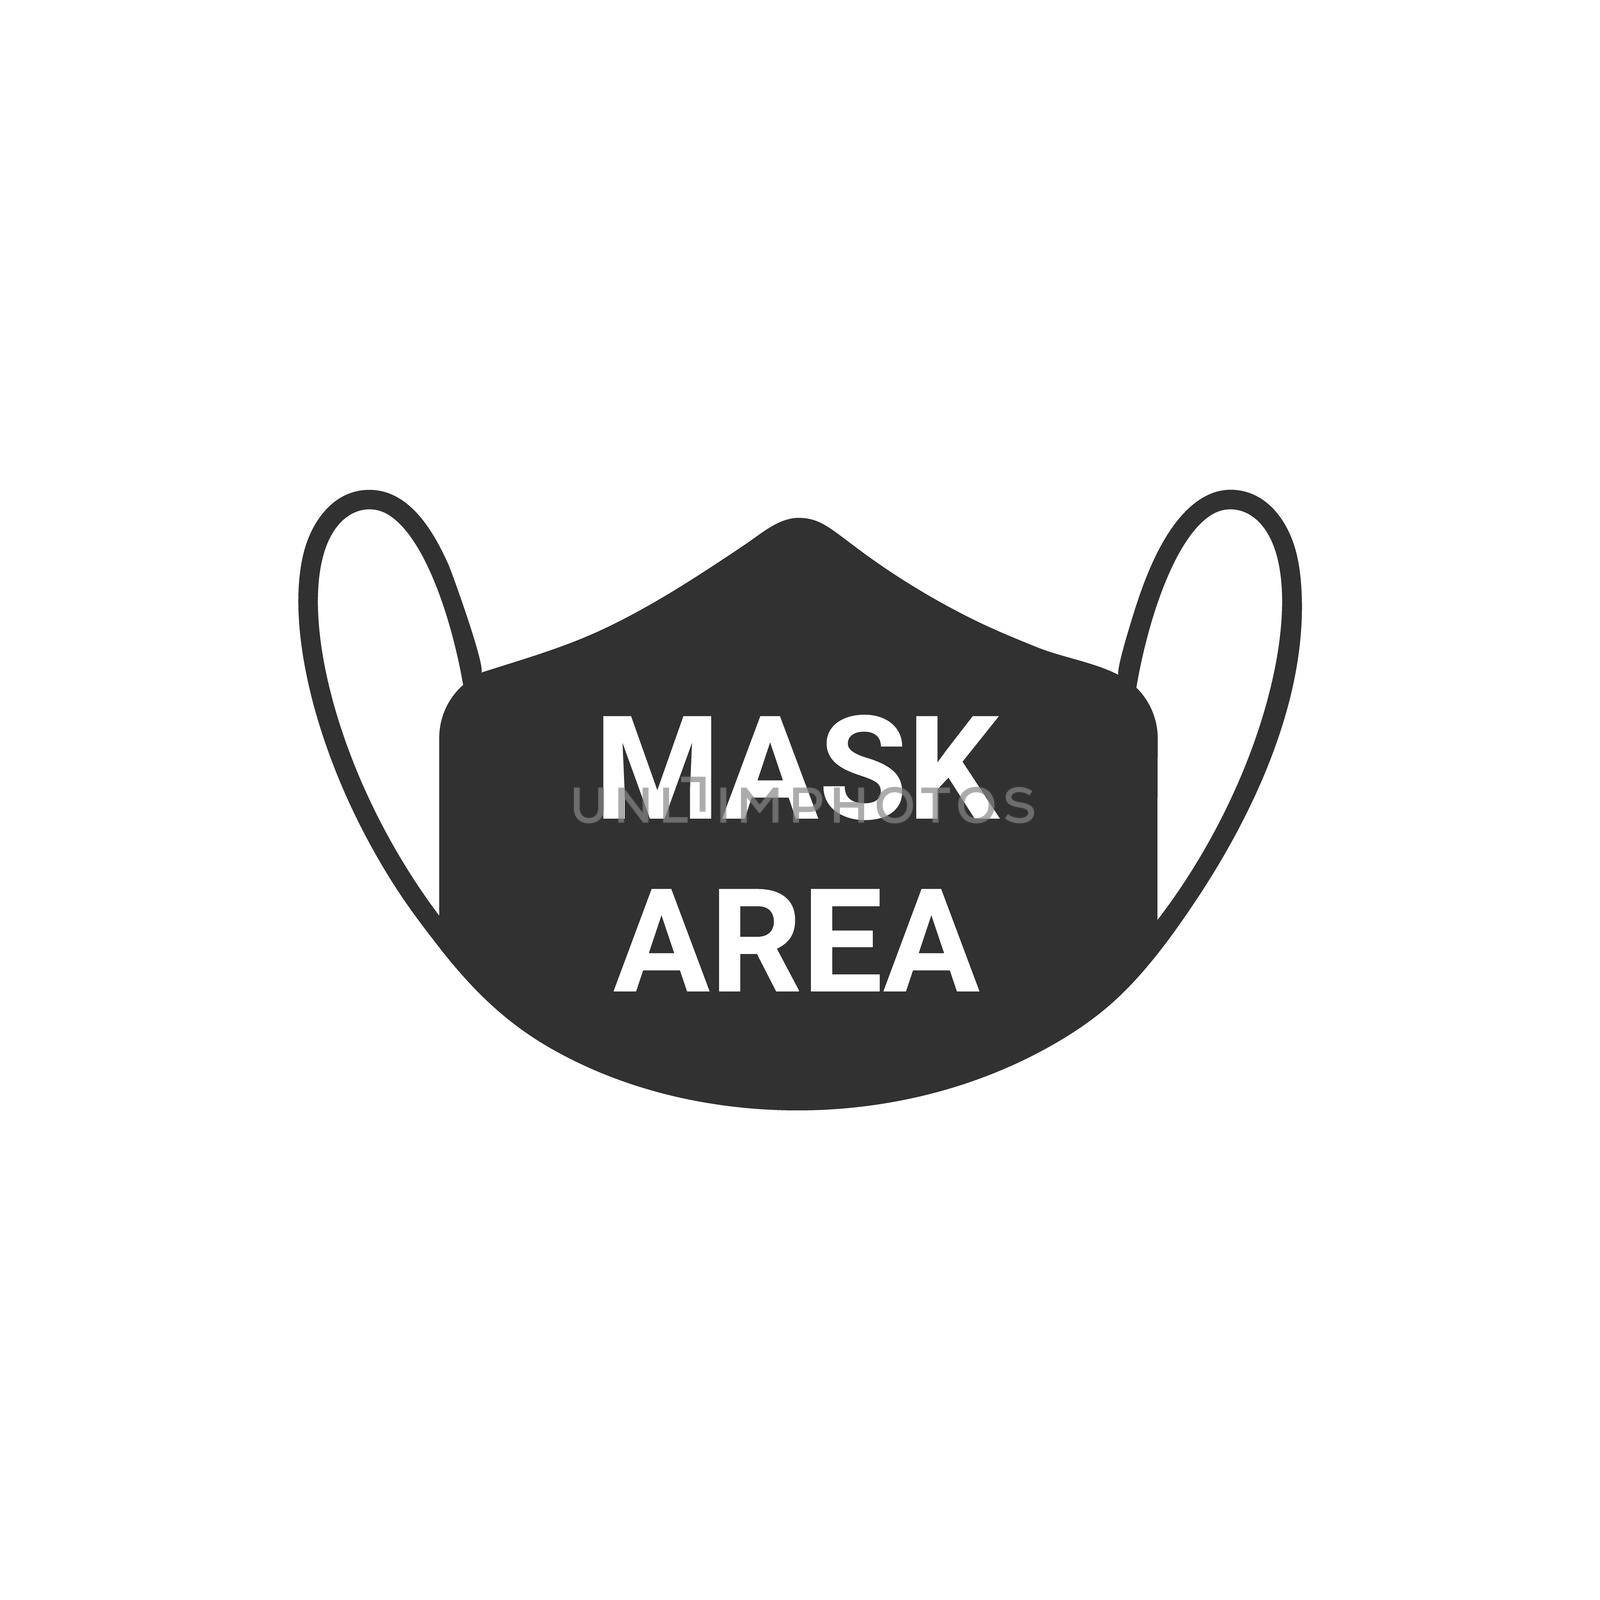 Mask area, Mask required warning prevention sign. Stock Vector illustration isolated